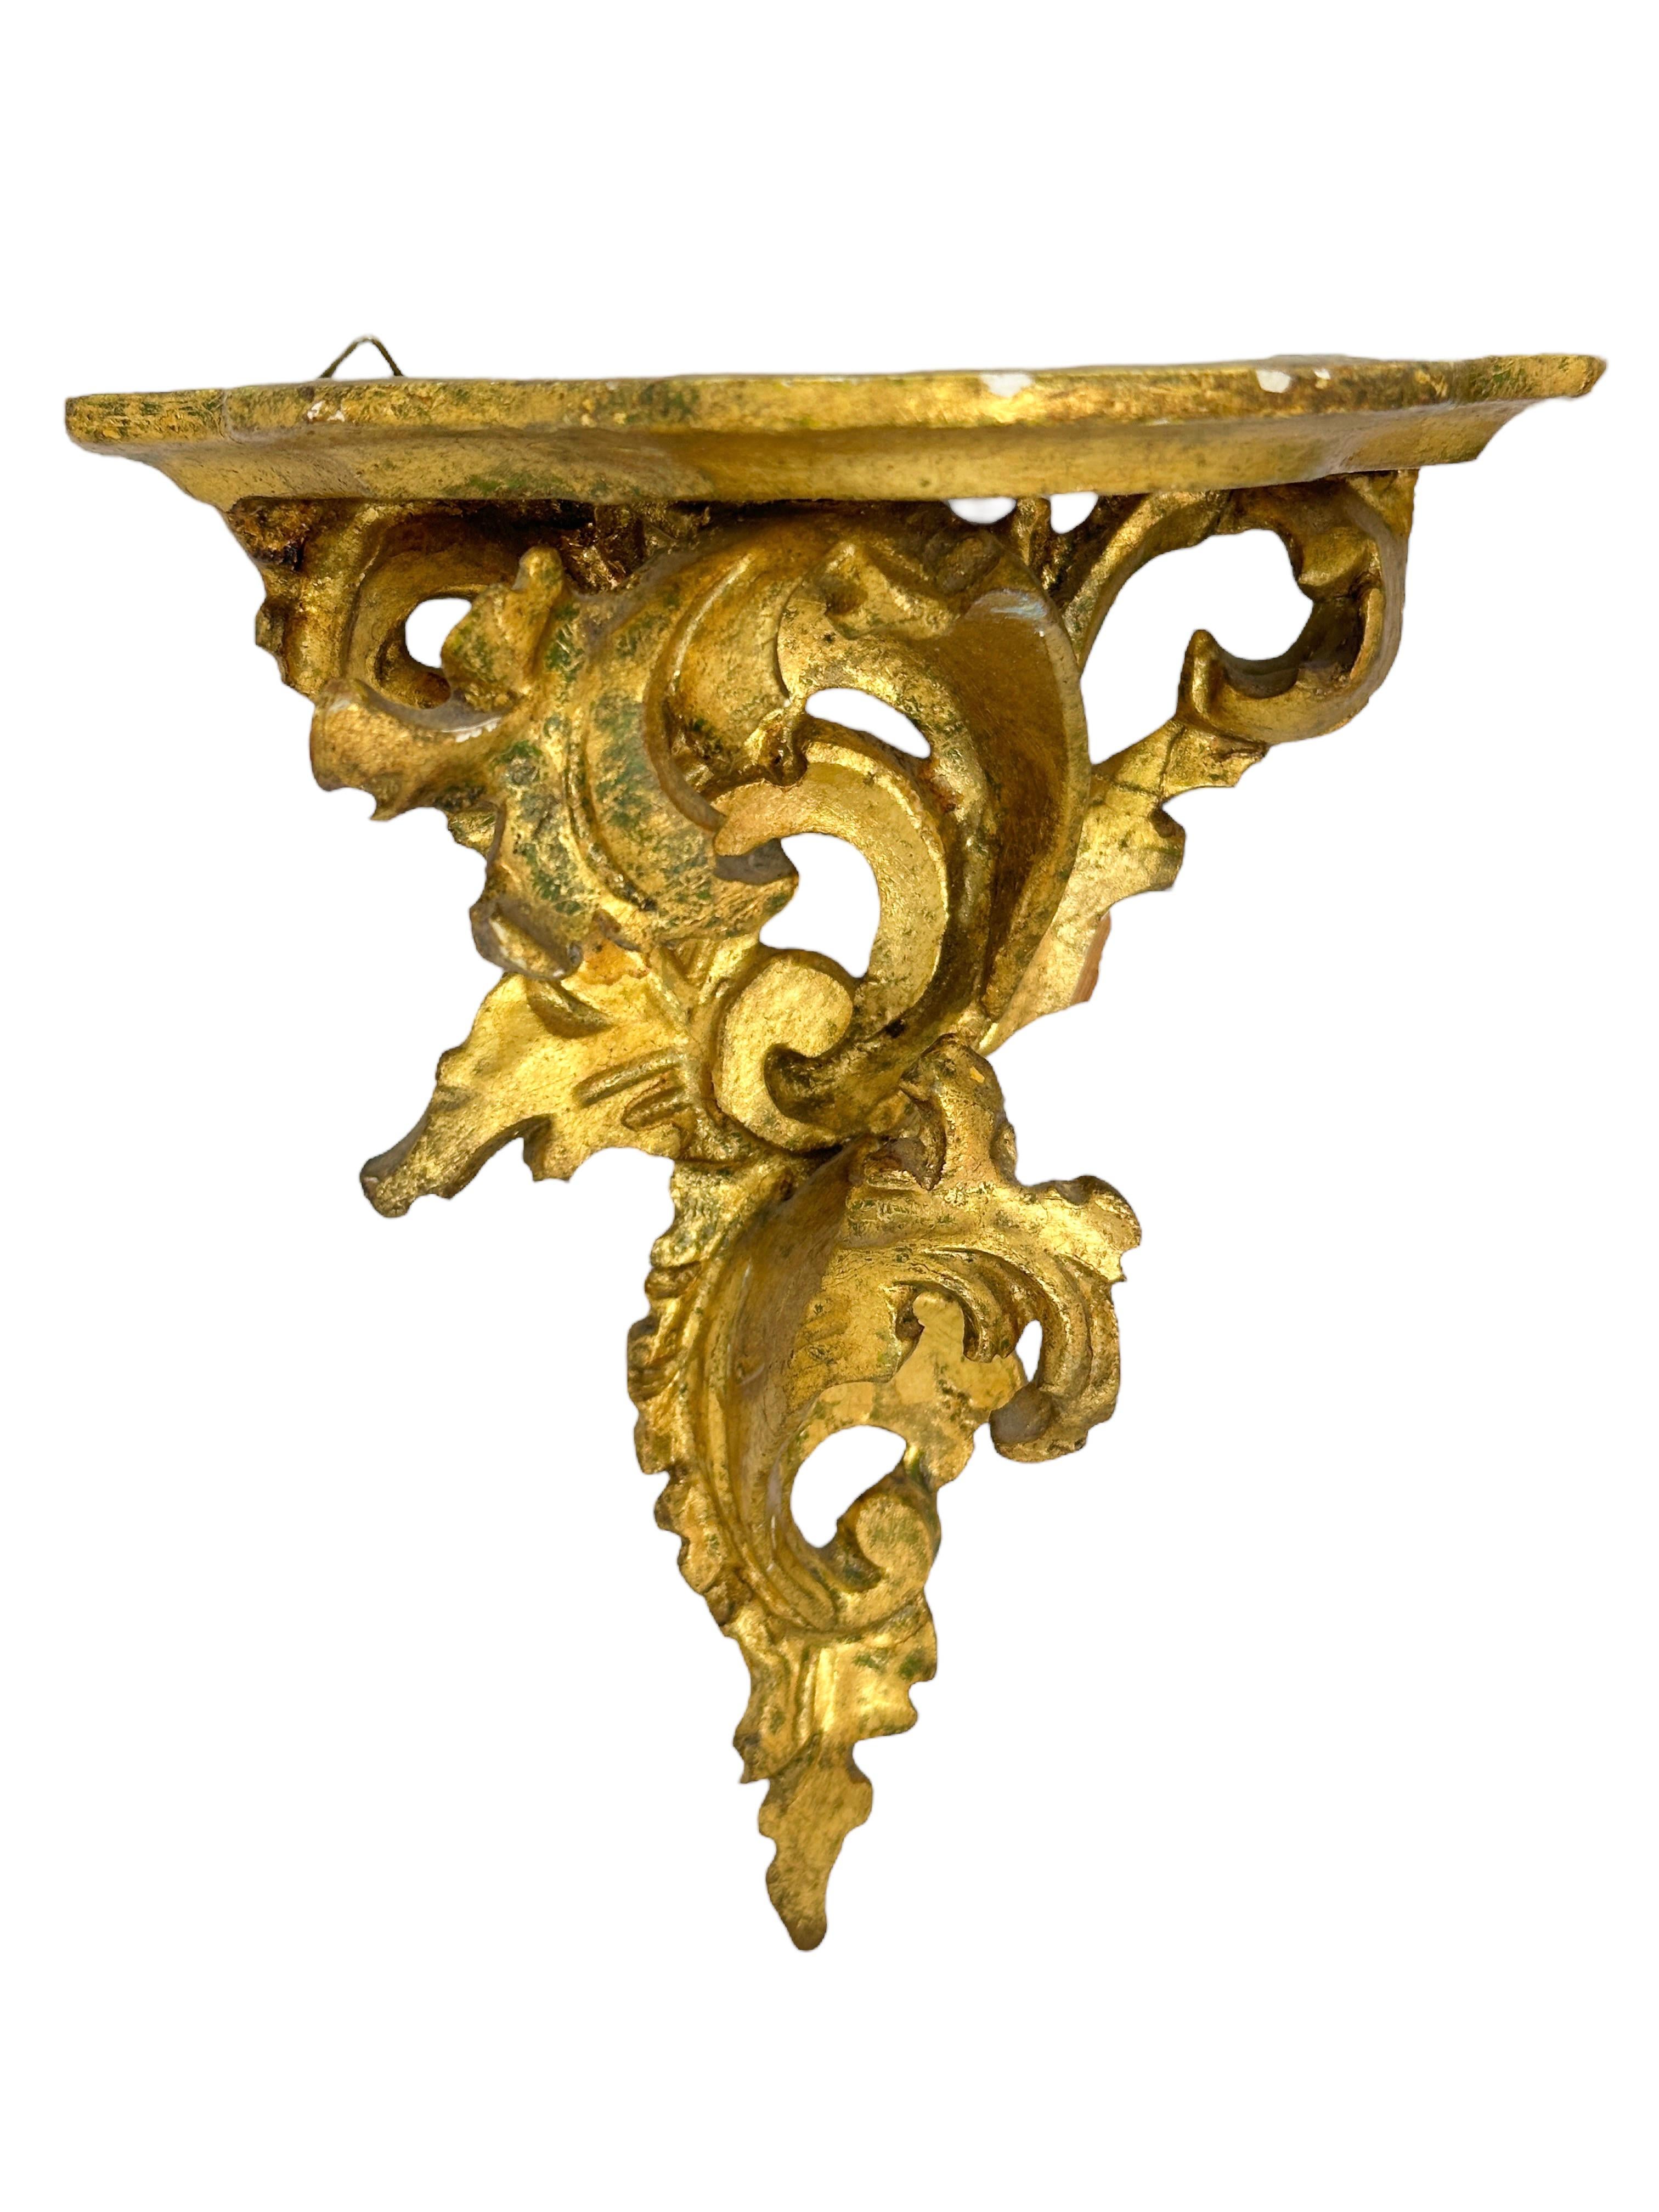 Pair of Italian Old Venetian Wall Shelf, Gilded Carved Acanthus, Rococo Style In Good Condition For Sale In Nuernberg, DE